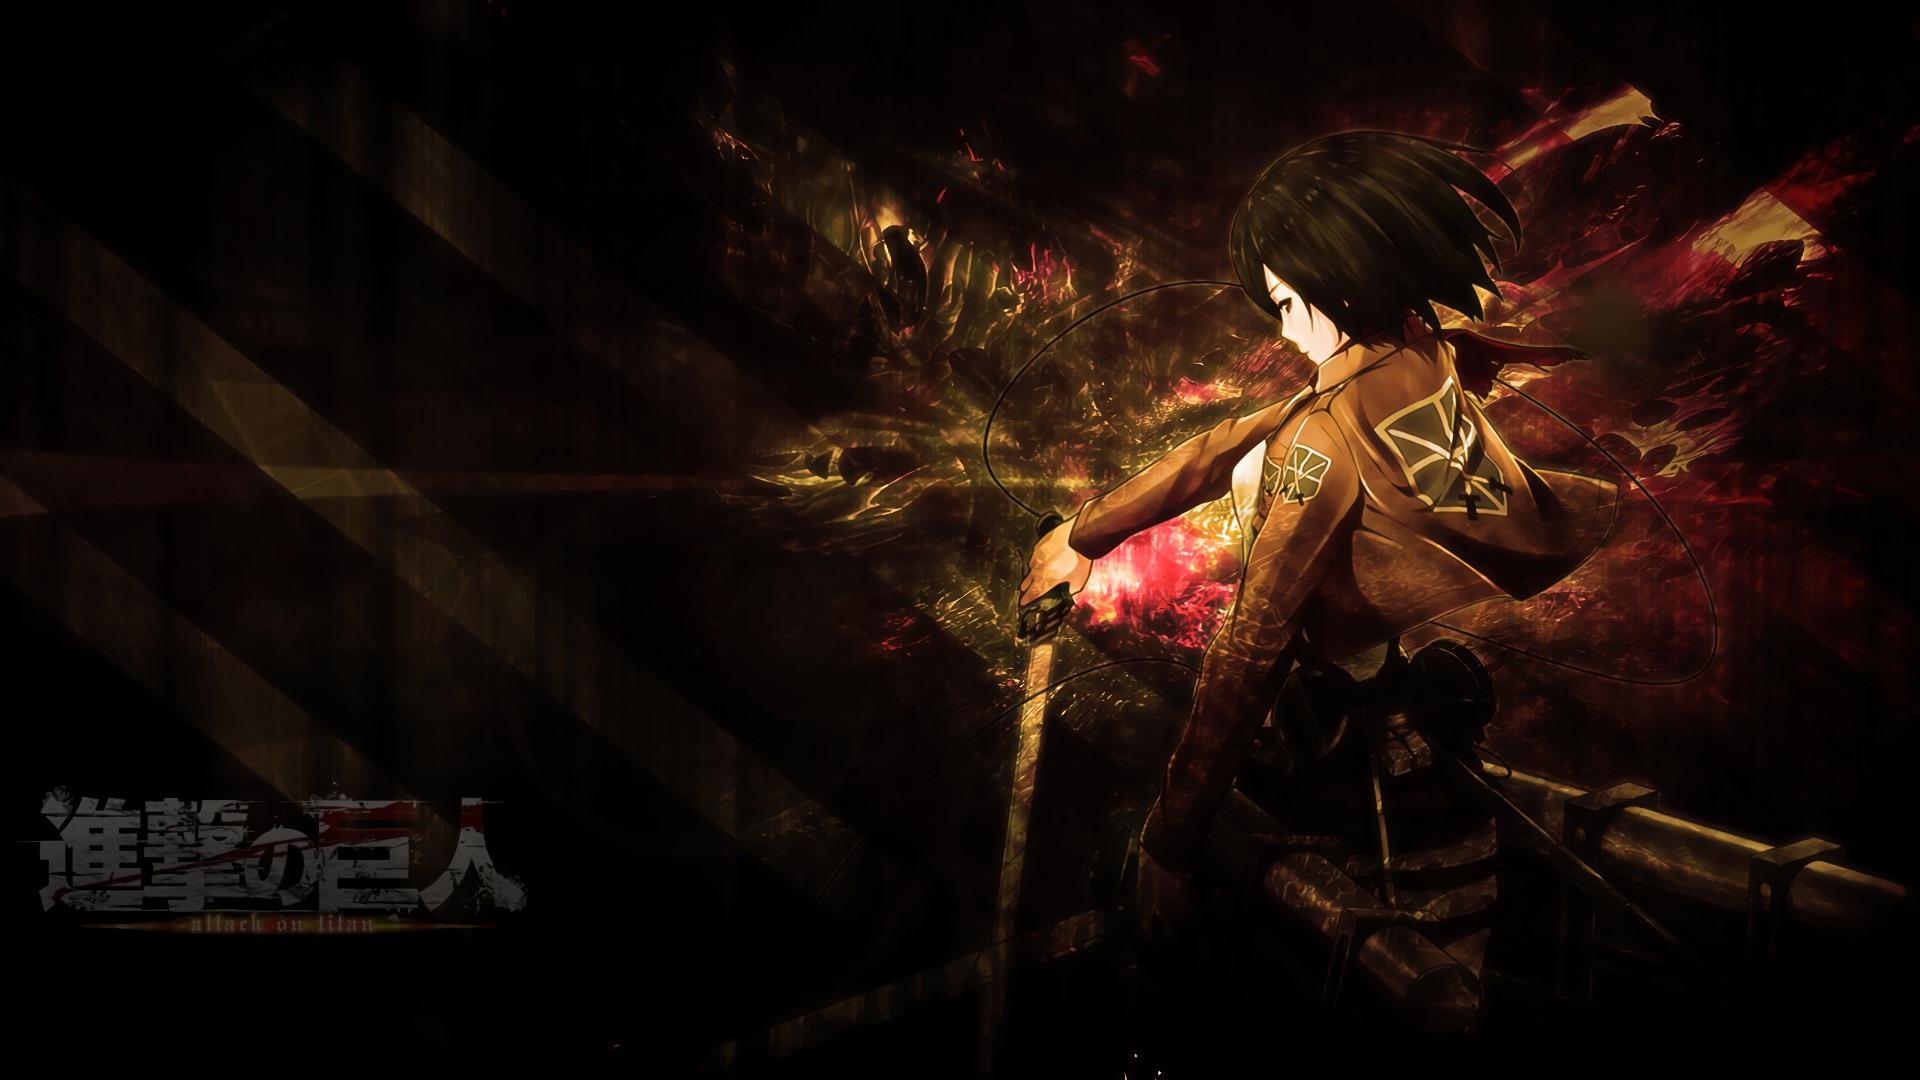 1920x1080 attack on titan wallpaper for mac computers - attack on titan category